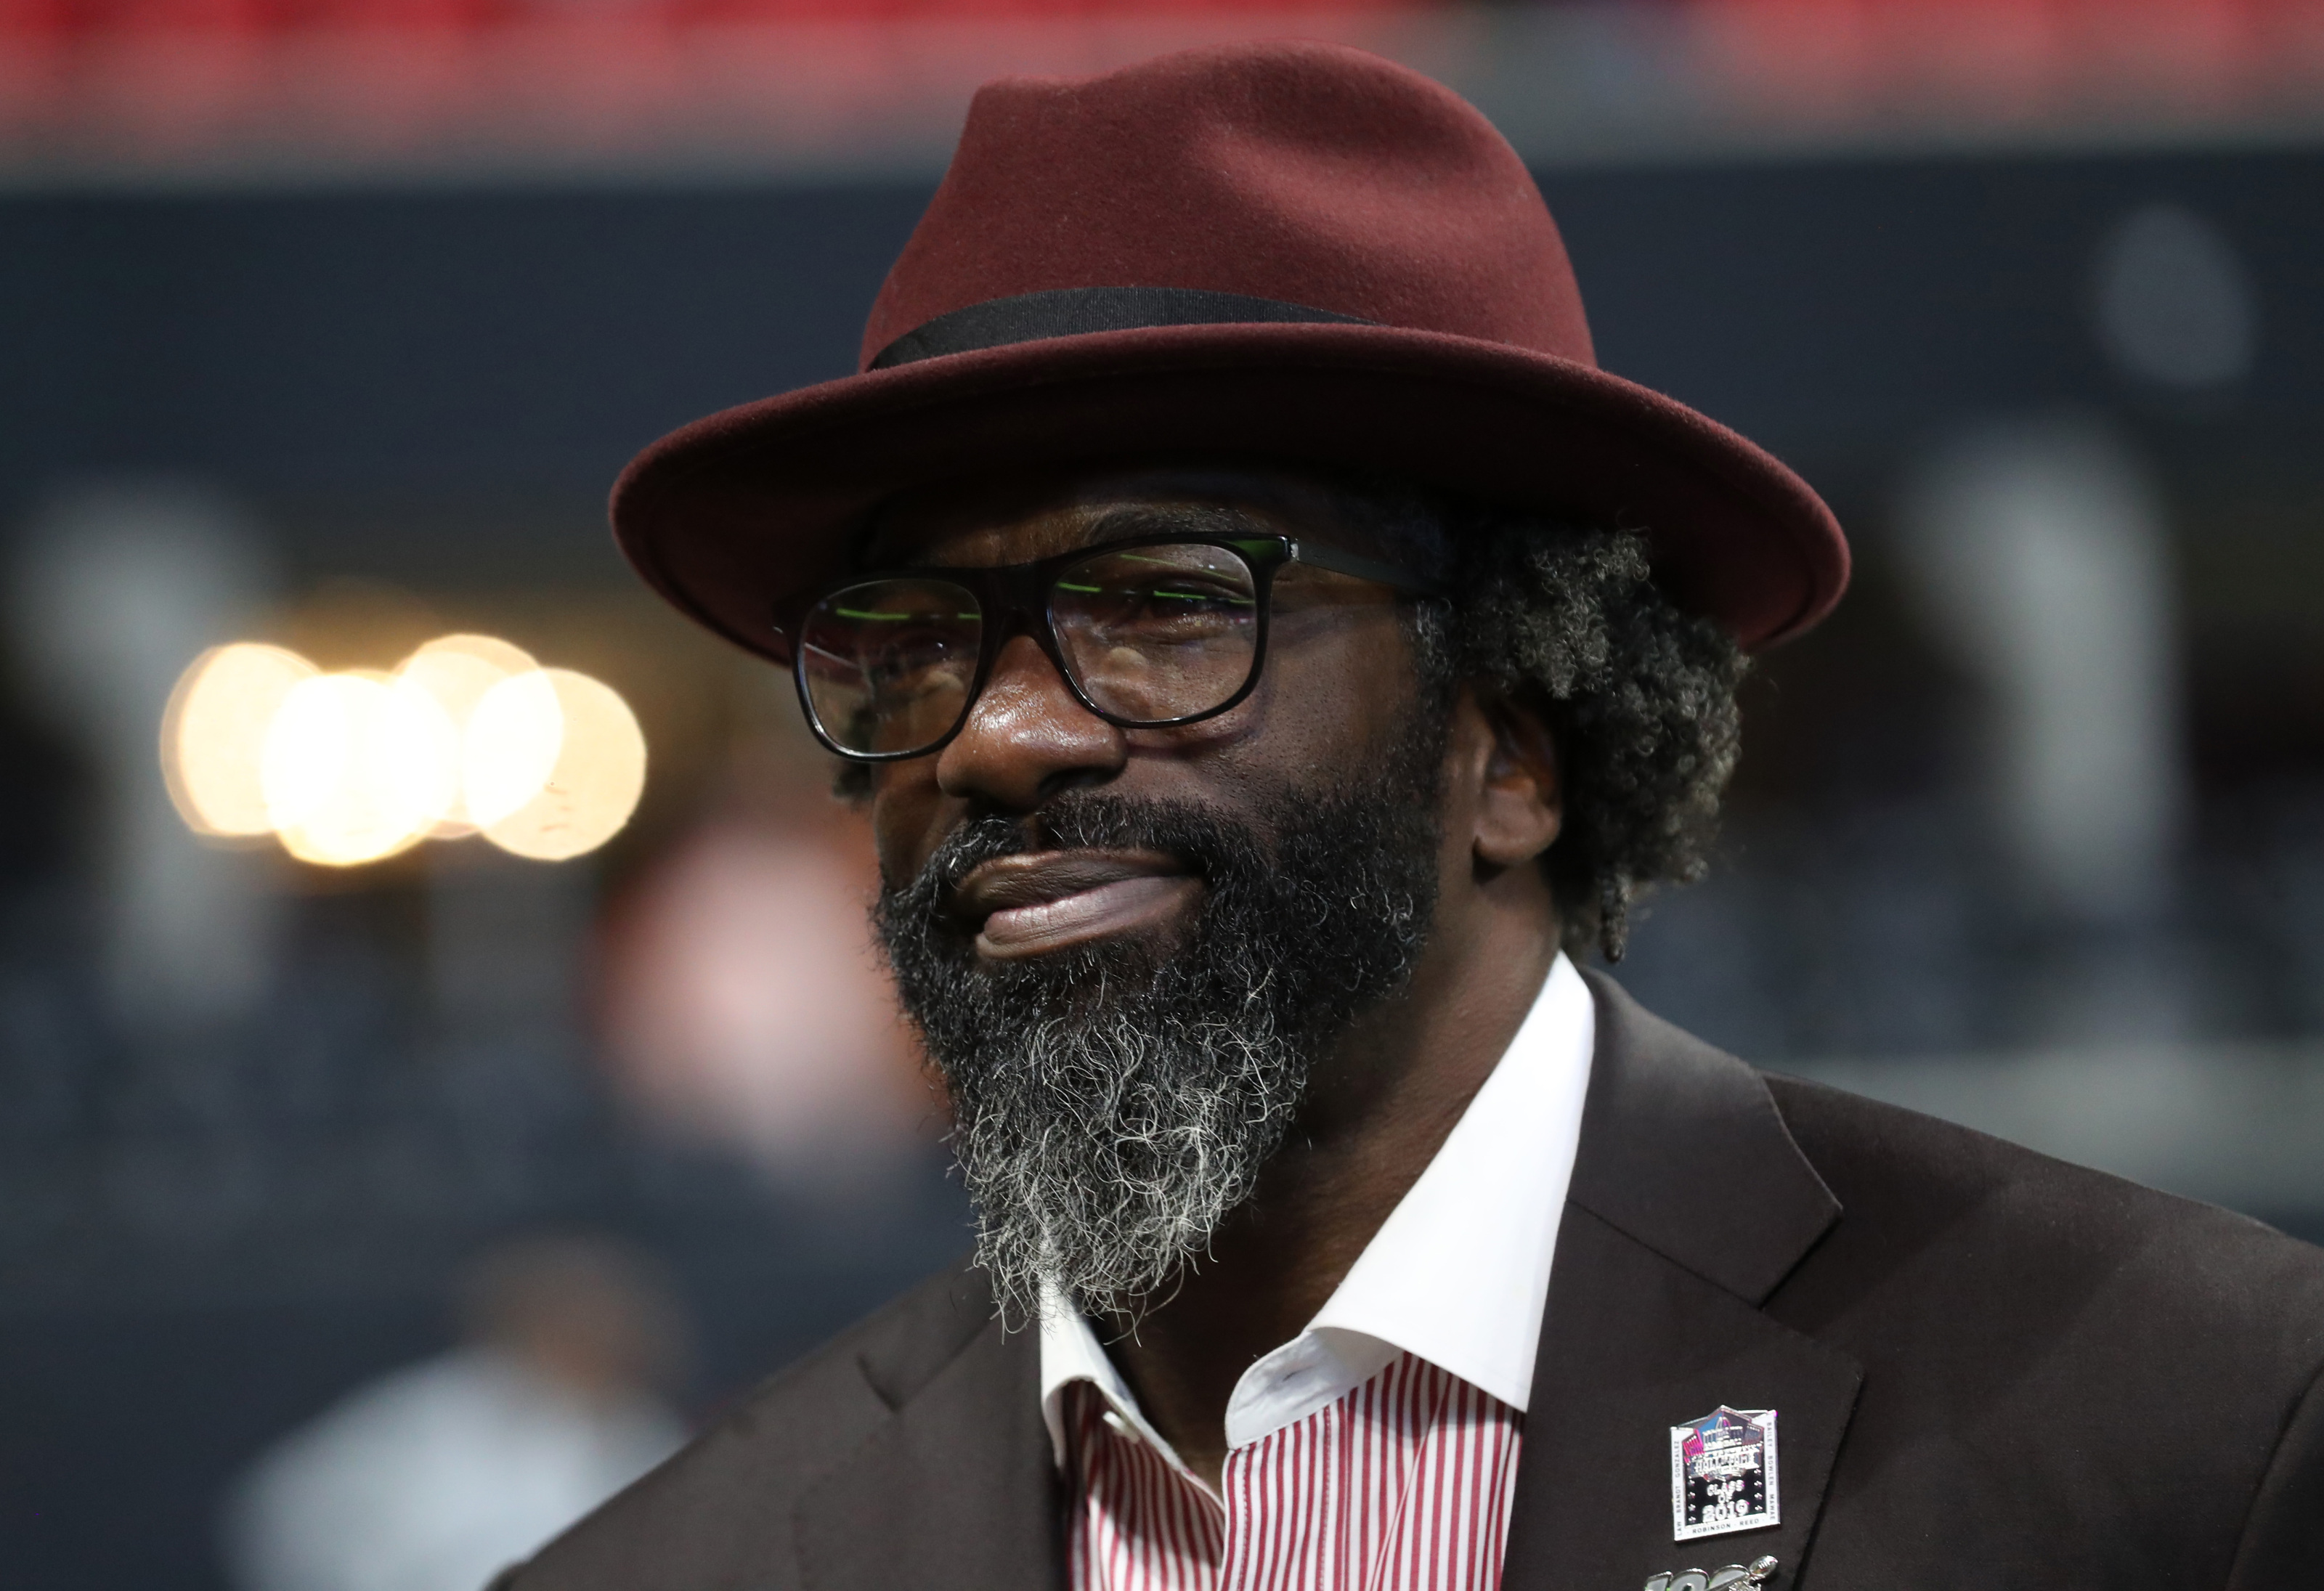 Miami football legend Ed Reed clarifies he is not a coachat this moment